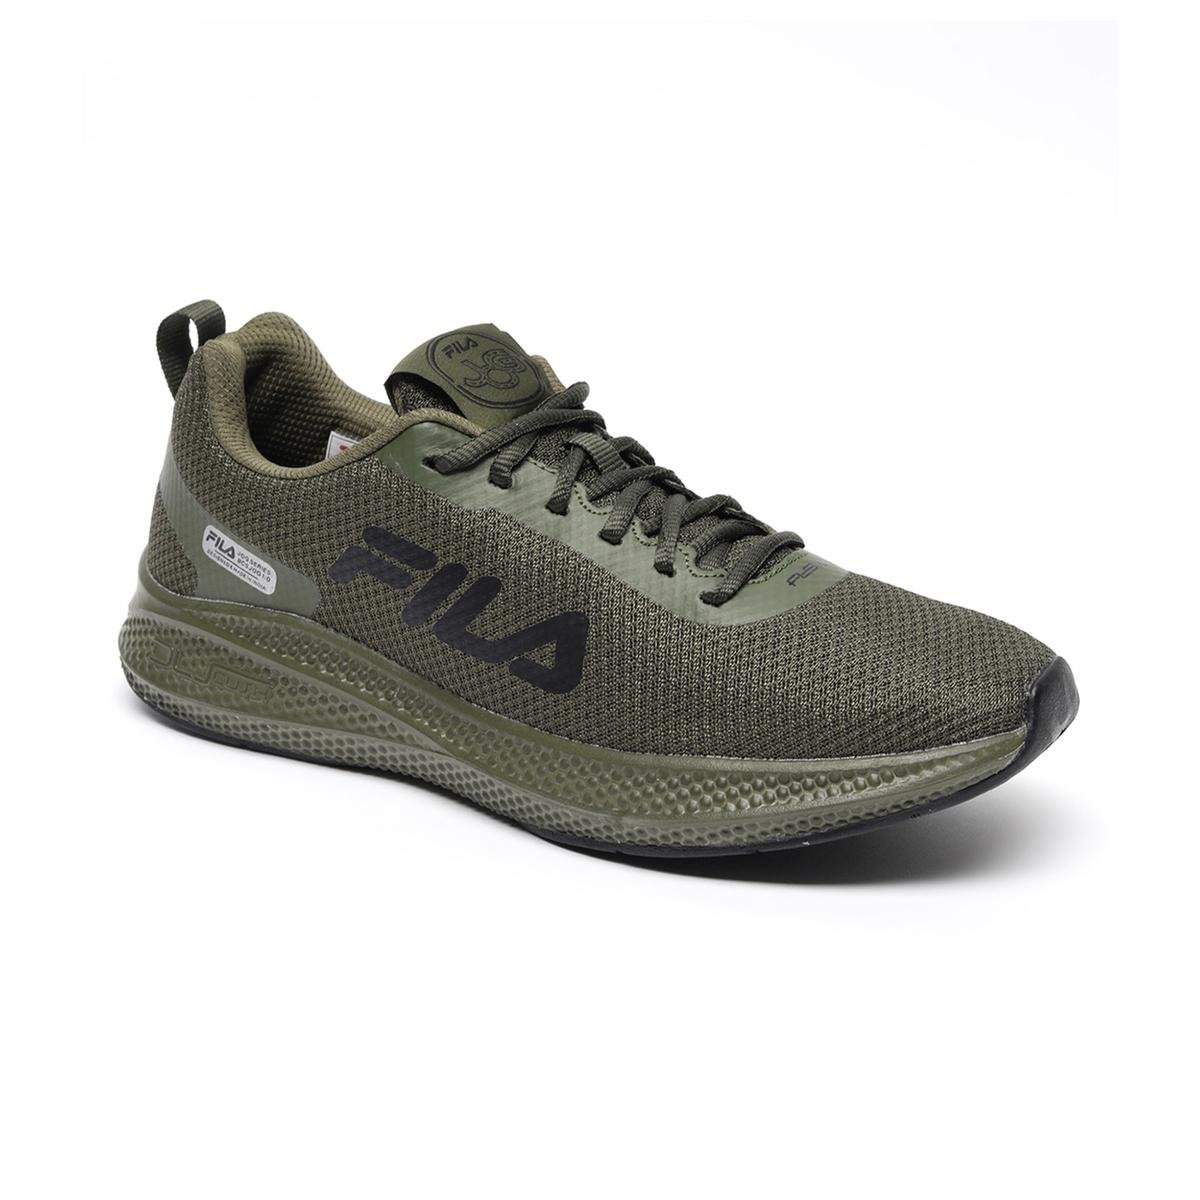 Buy FILA Atmosphere Sneakers for SAR 225.00 | The Deal Outlet